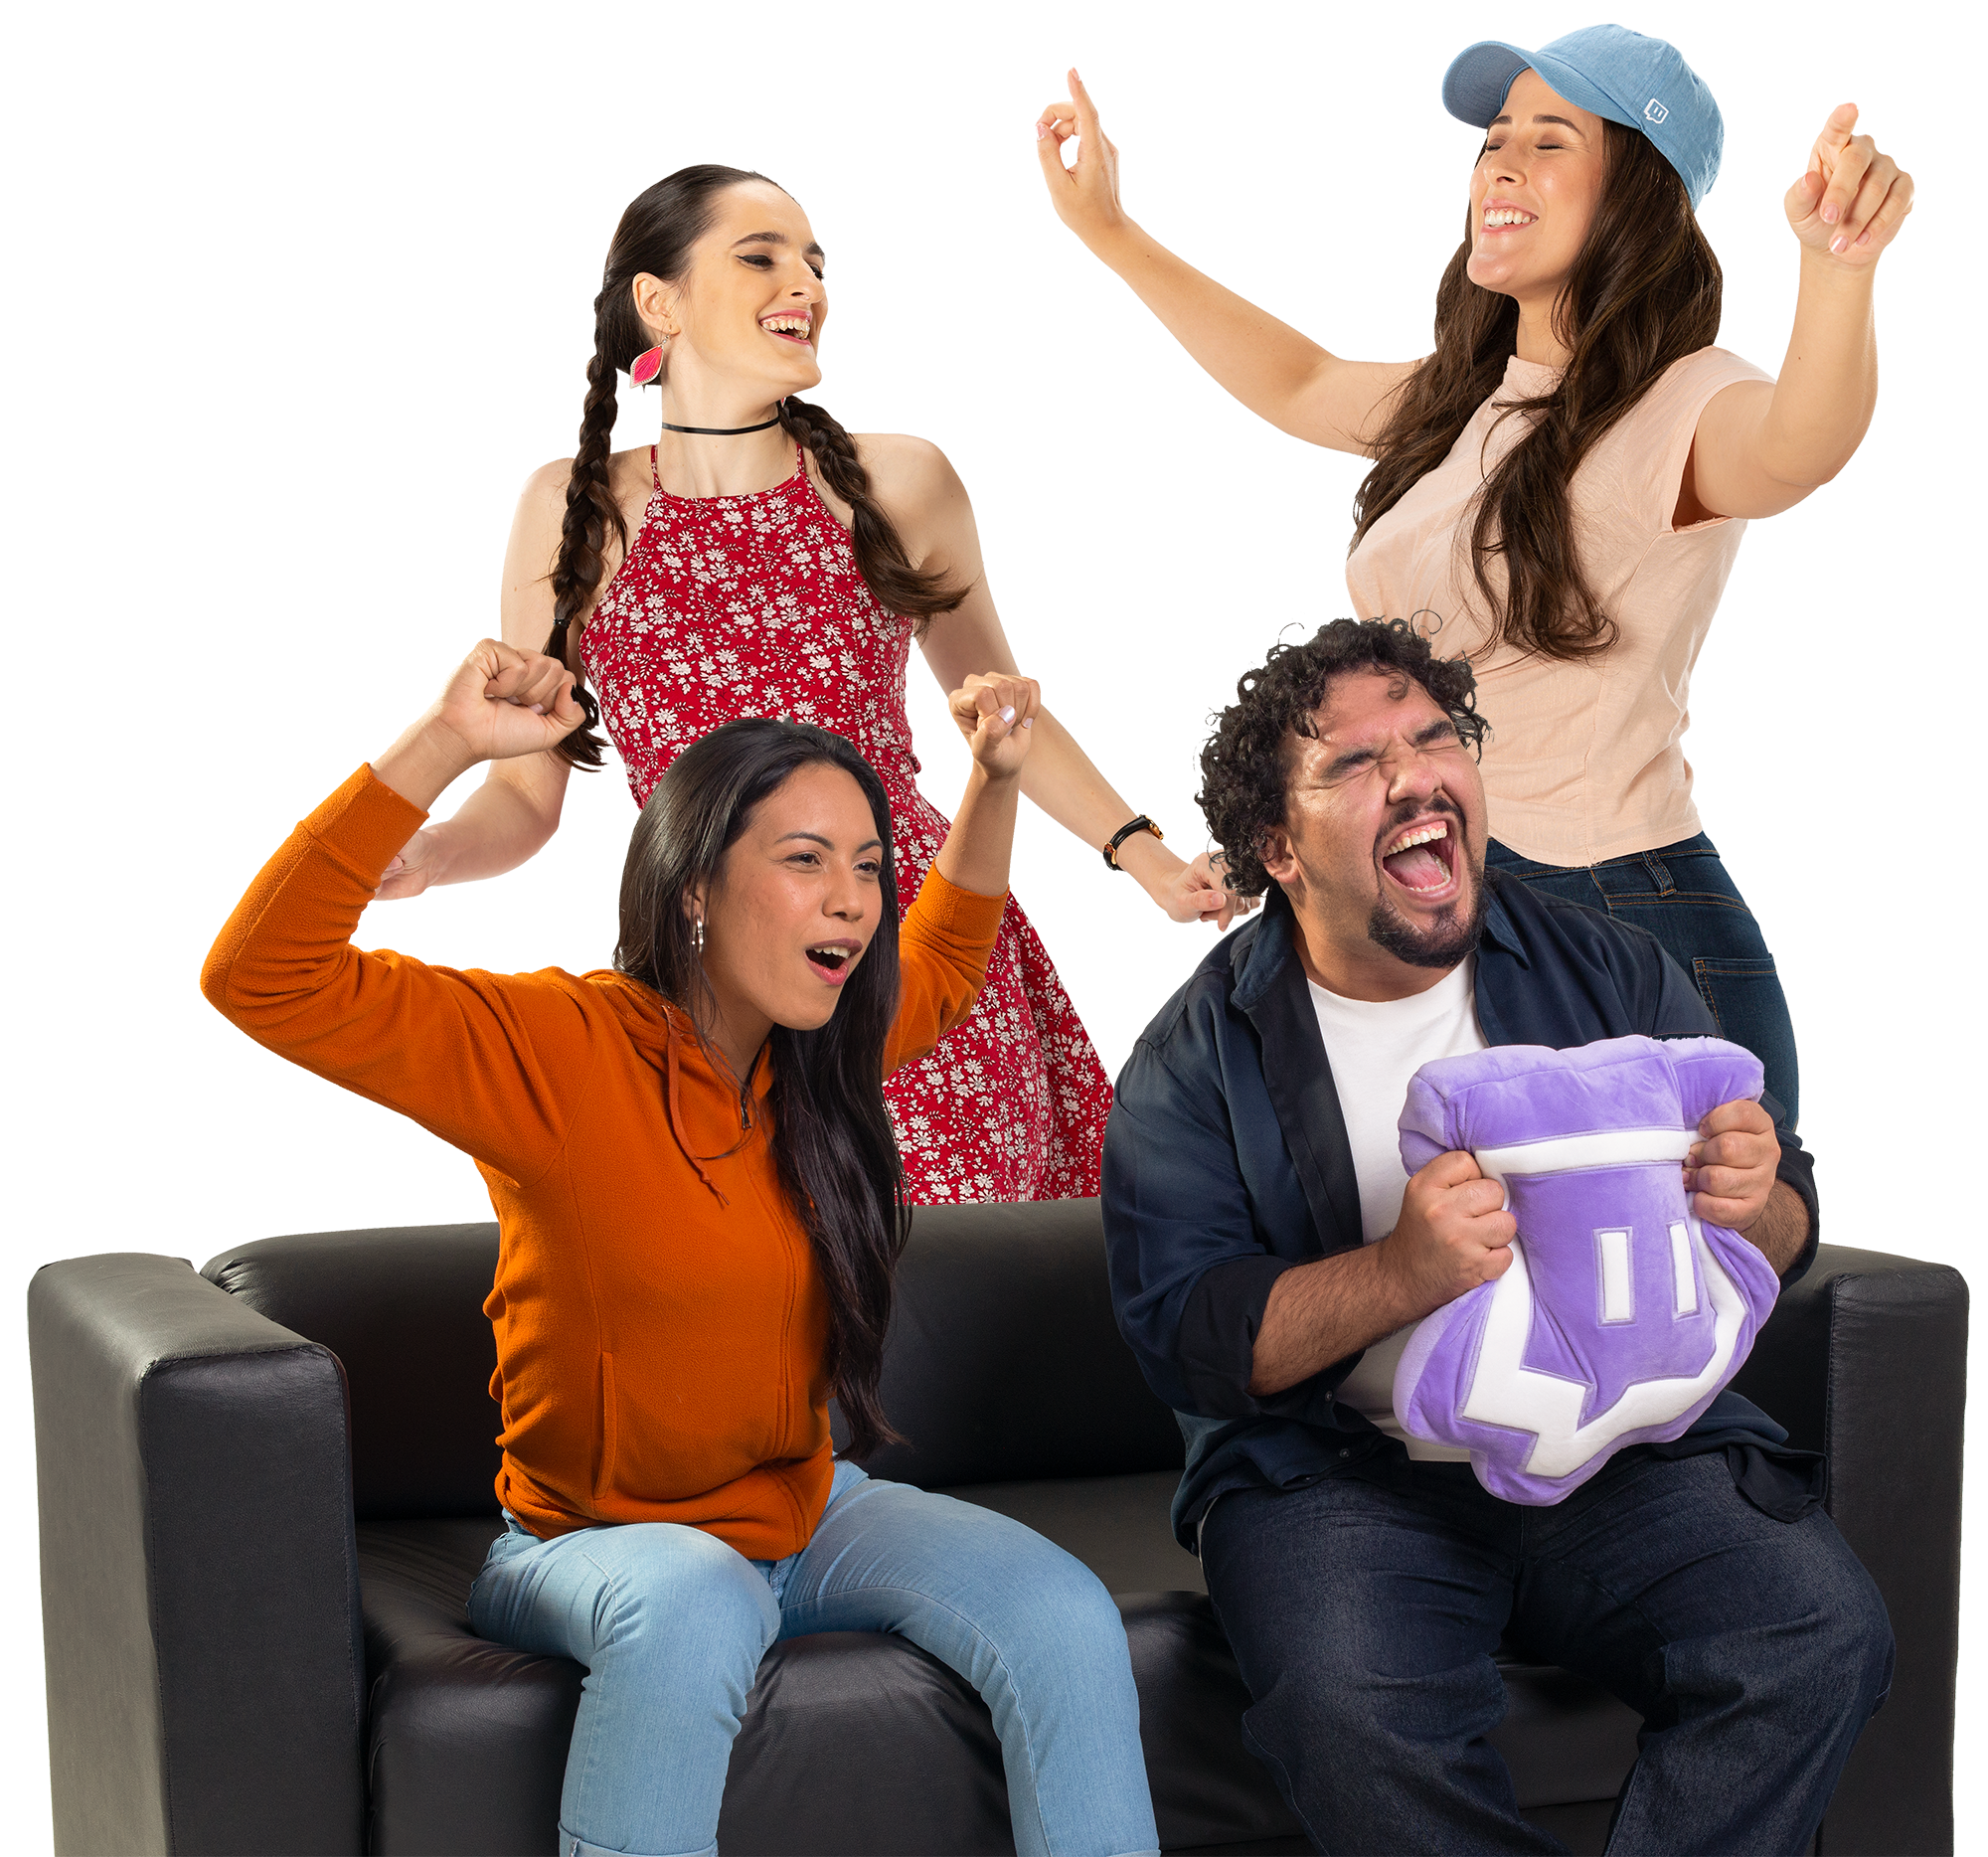 Group of people sitting on a couch cheering